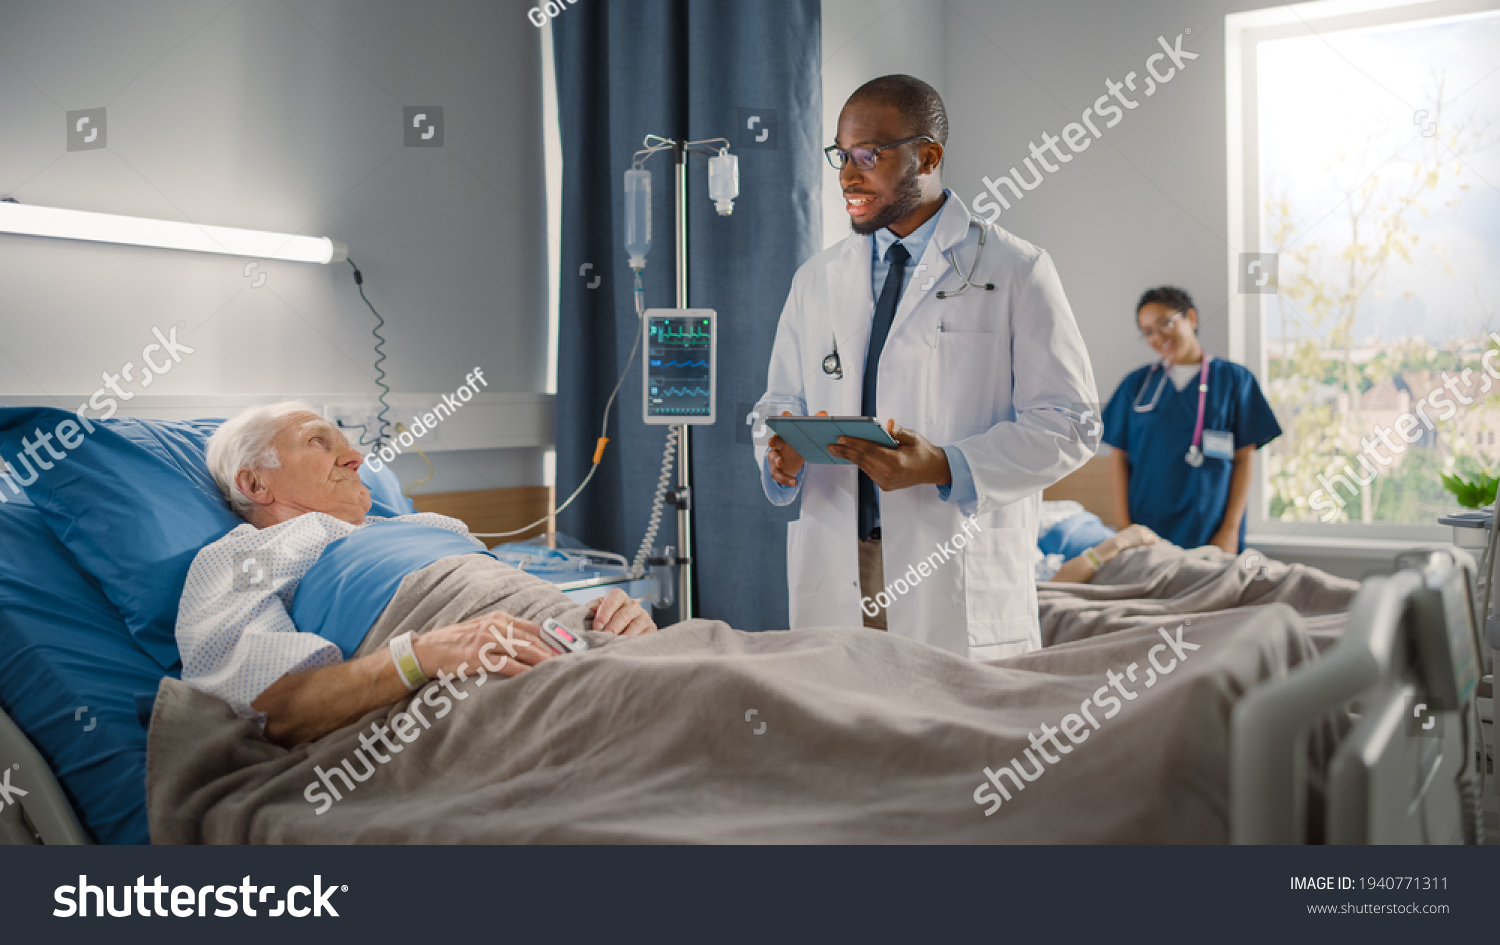 Hospital Ward: Friendly Black Doctor Talks with Elderly Caucasian Patient Resting in Bed, Asks Health Care Questions. Doctor Uses Tablet Computer. Old Man Fully Recovering after Successful Surgery #1940771311